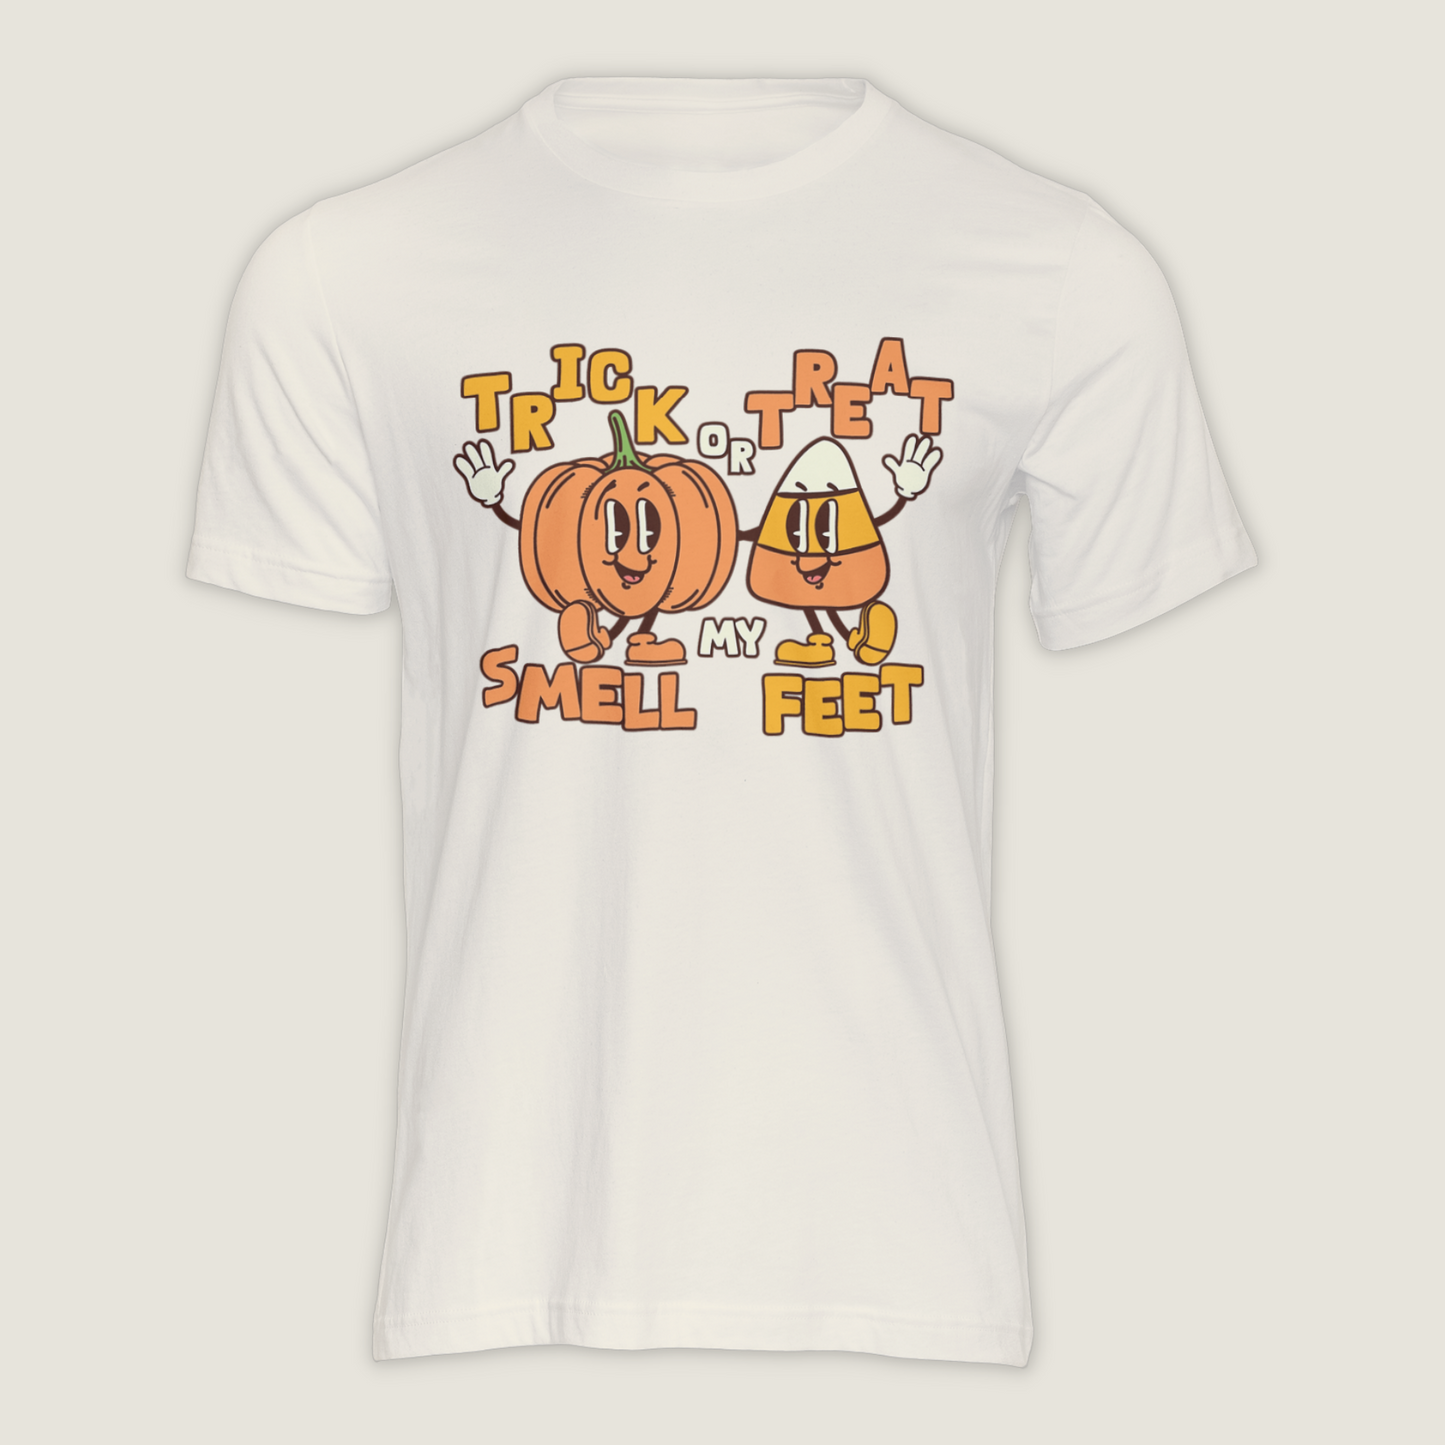 Trick or Treat Smell my Feet - Shirt